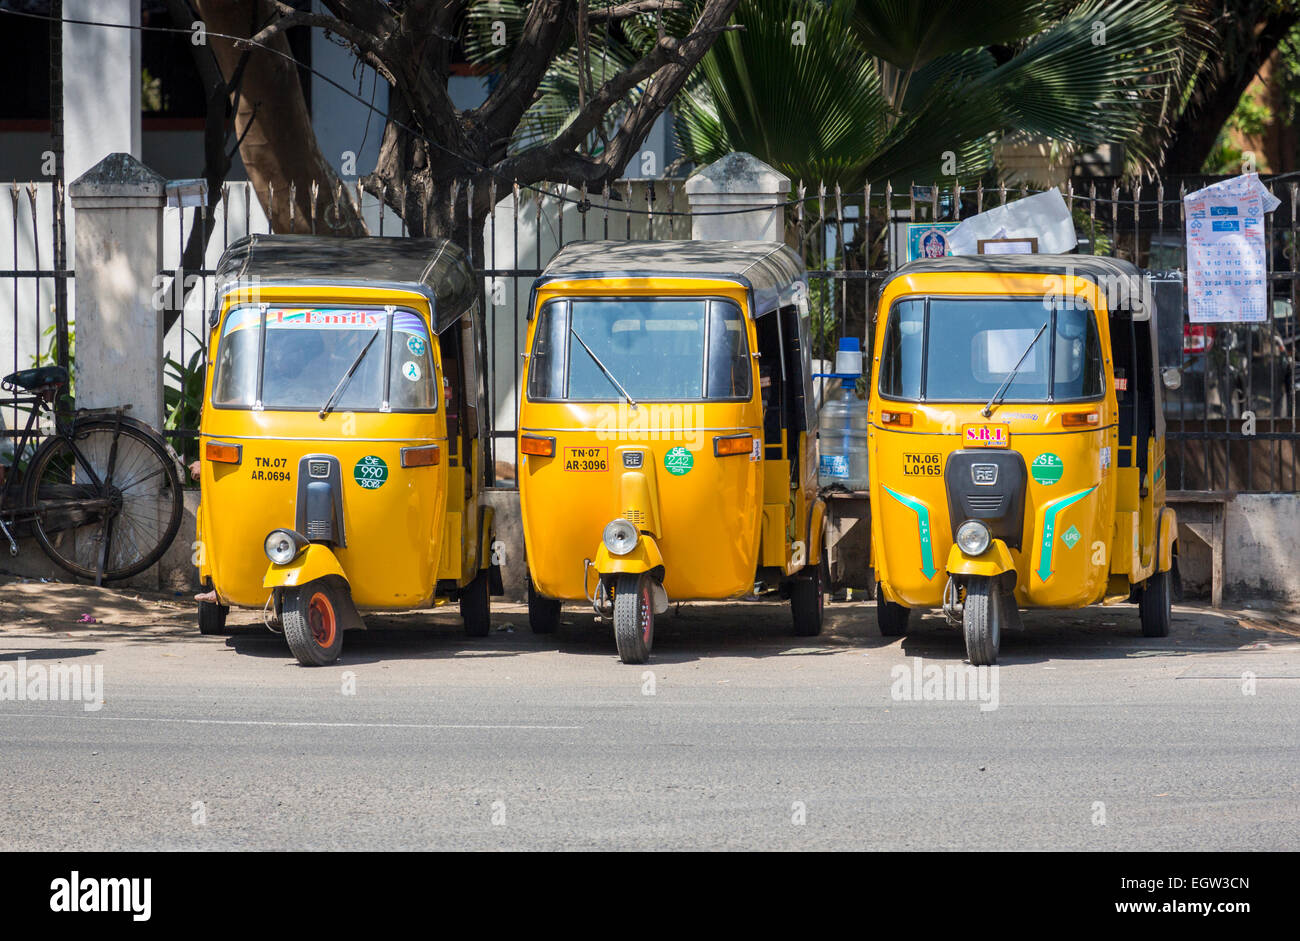 Row of three yellow tuk-tuks for hire, parked in a street in Chennai, Tamil Nadu, southern India Stock Photo